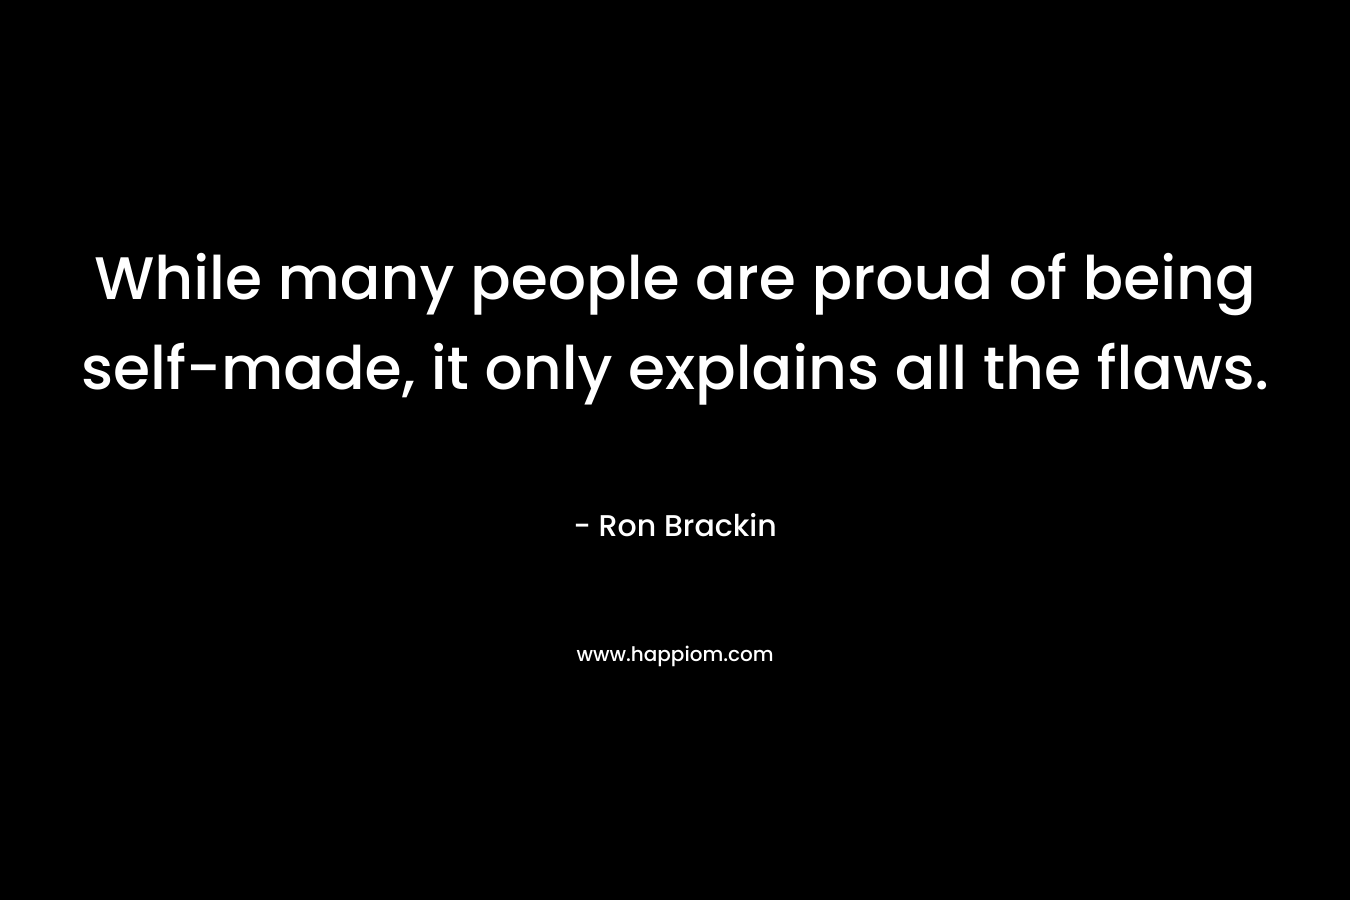 While many people are proud of being self-made, it only explains all the flaws. – Ron Brackin